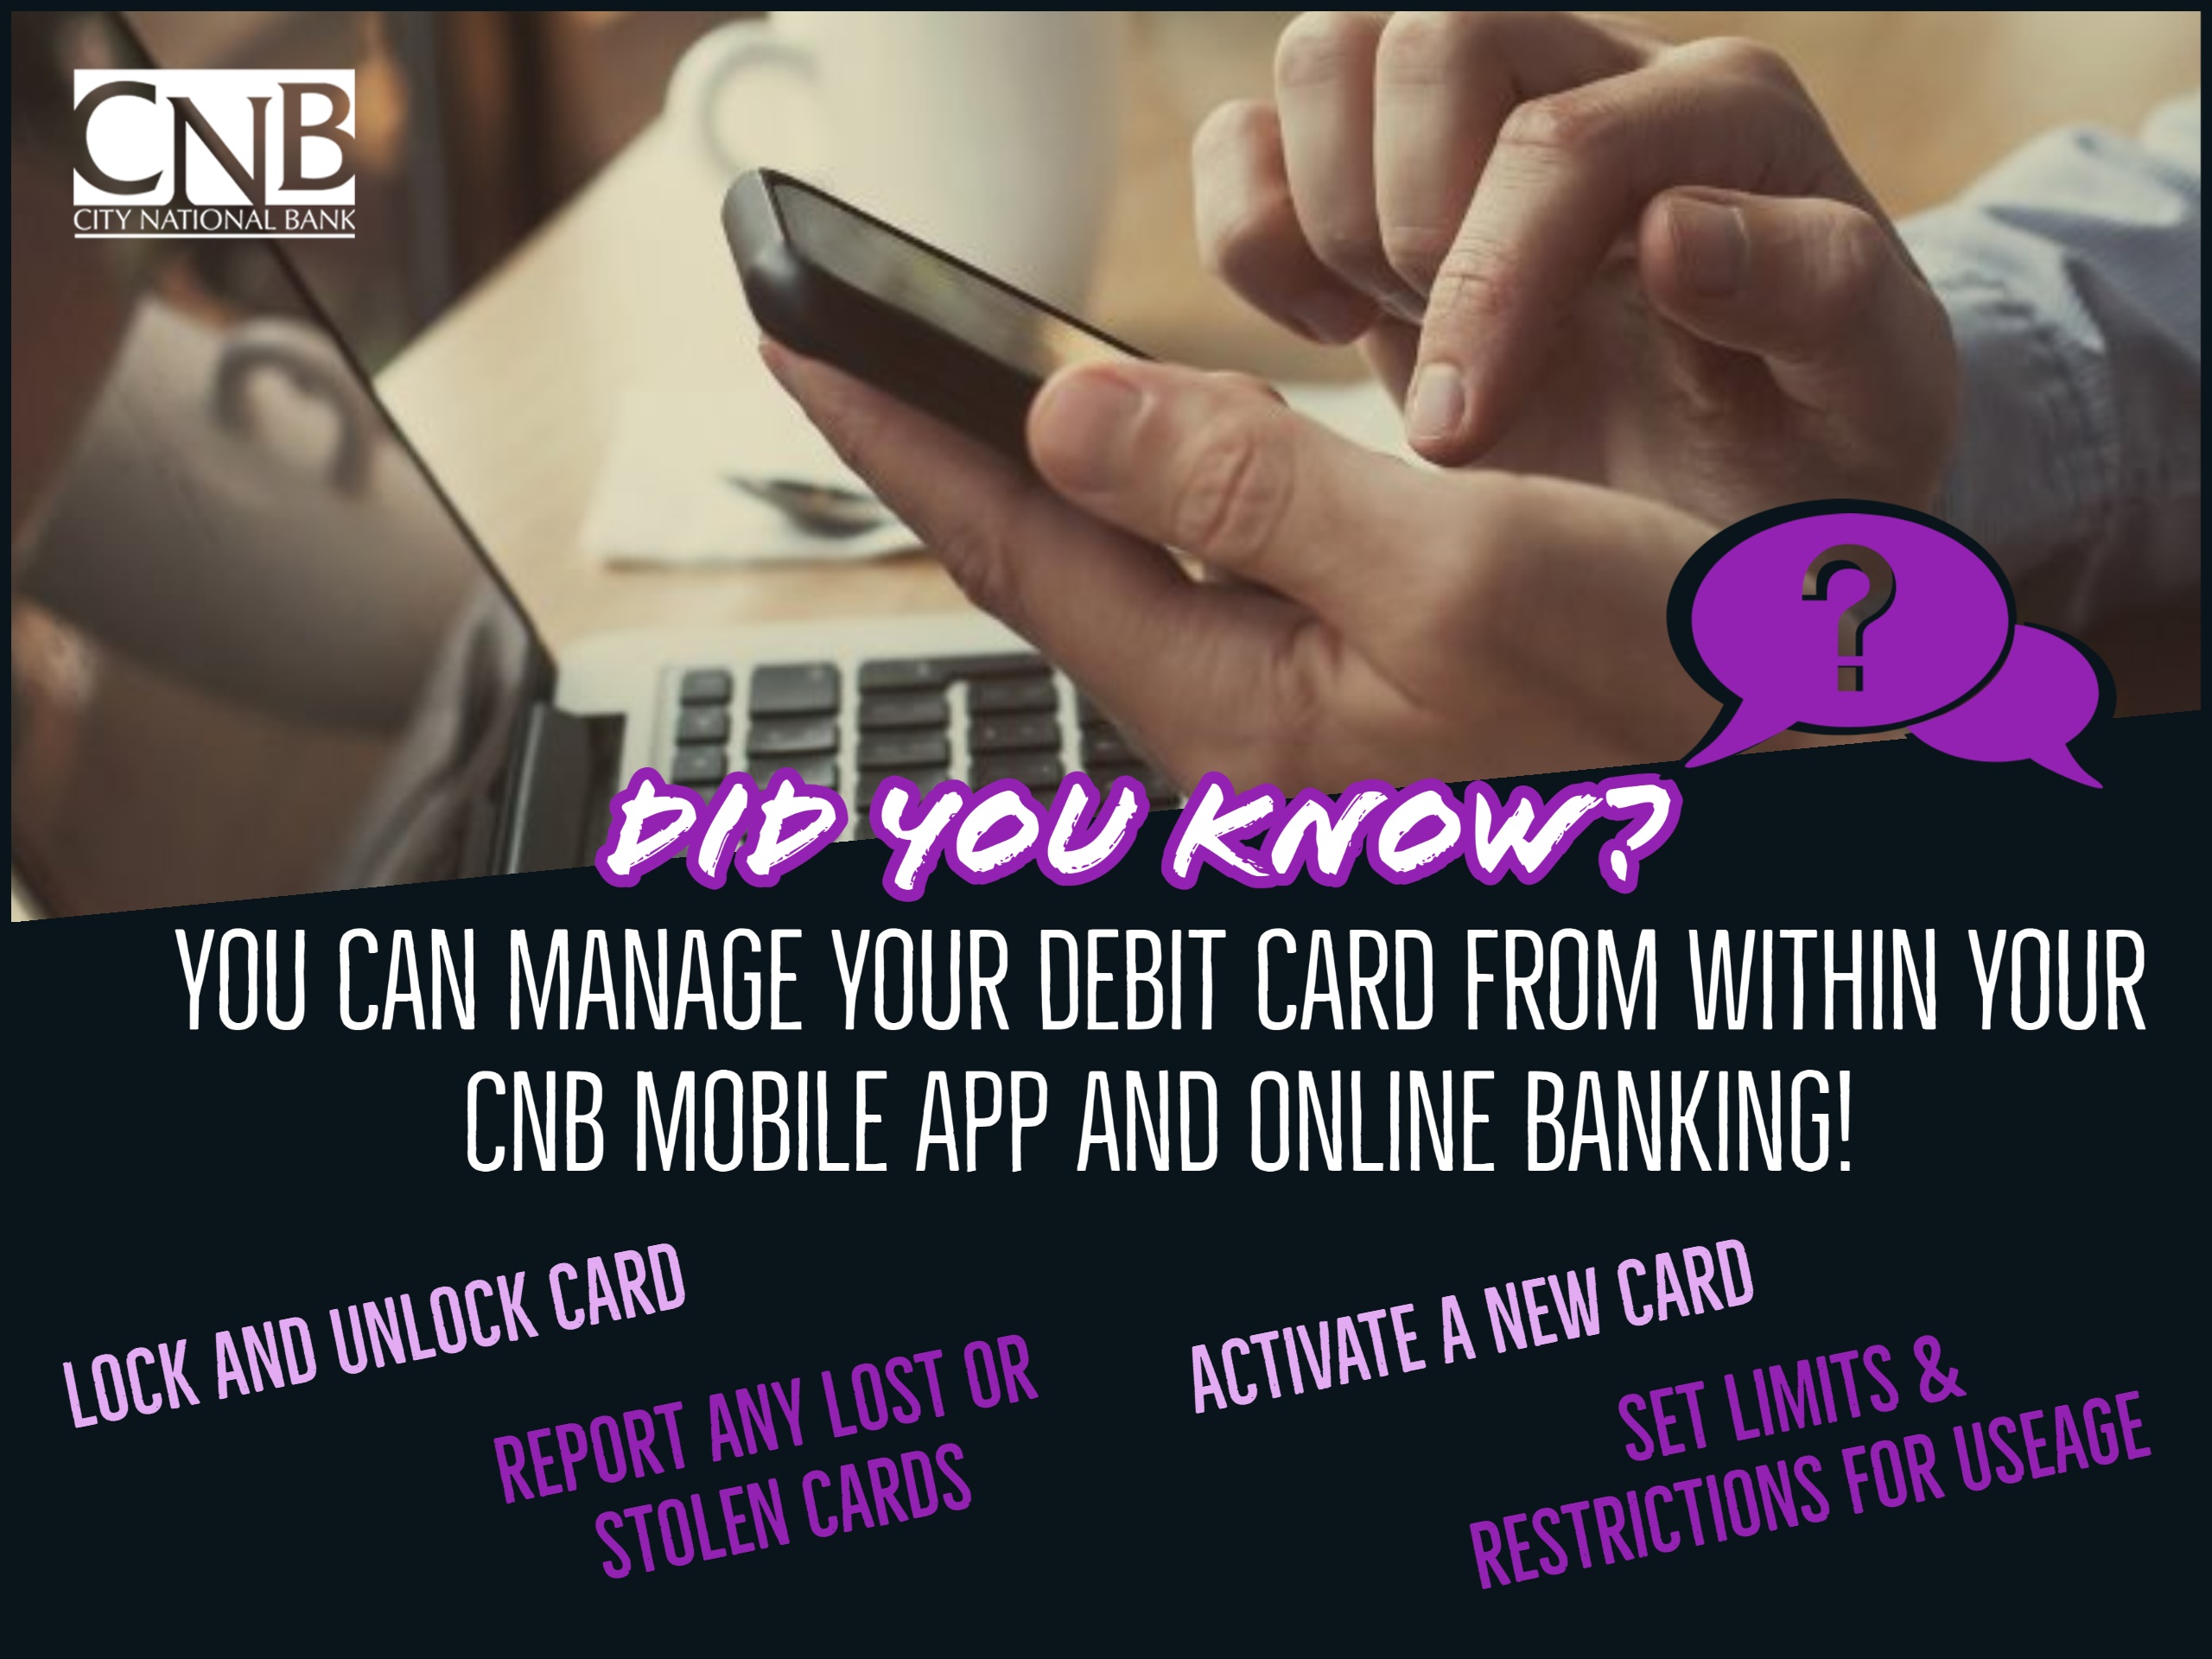 "did you know" graphic explaining debit card management via the CNB mobile banking app and online banking